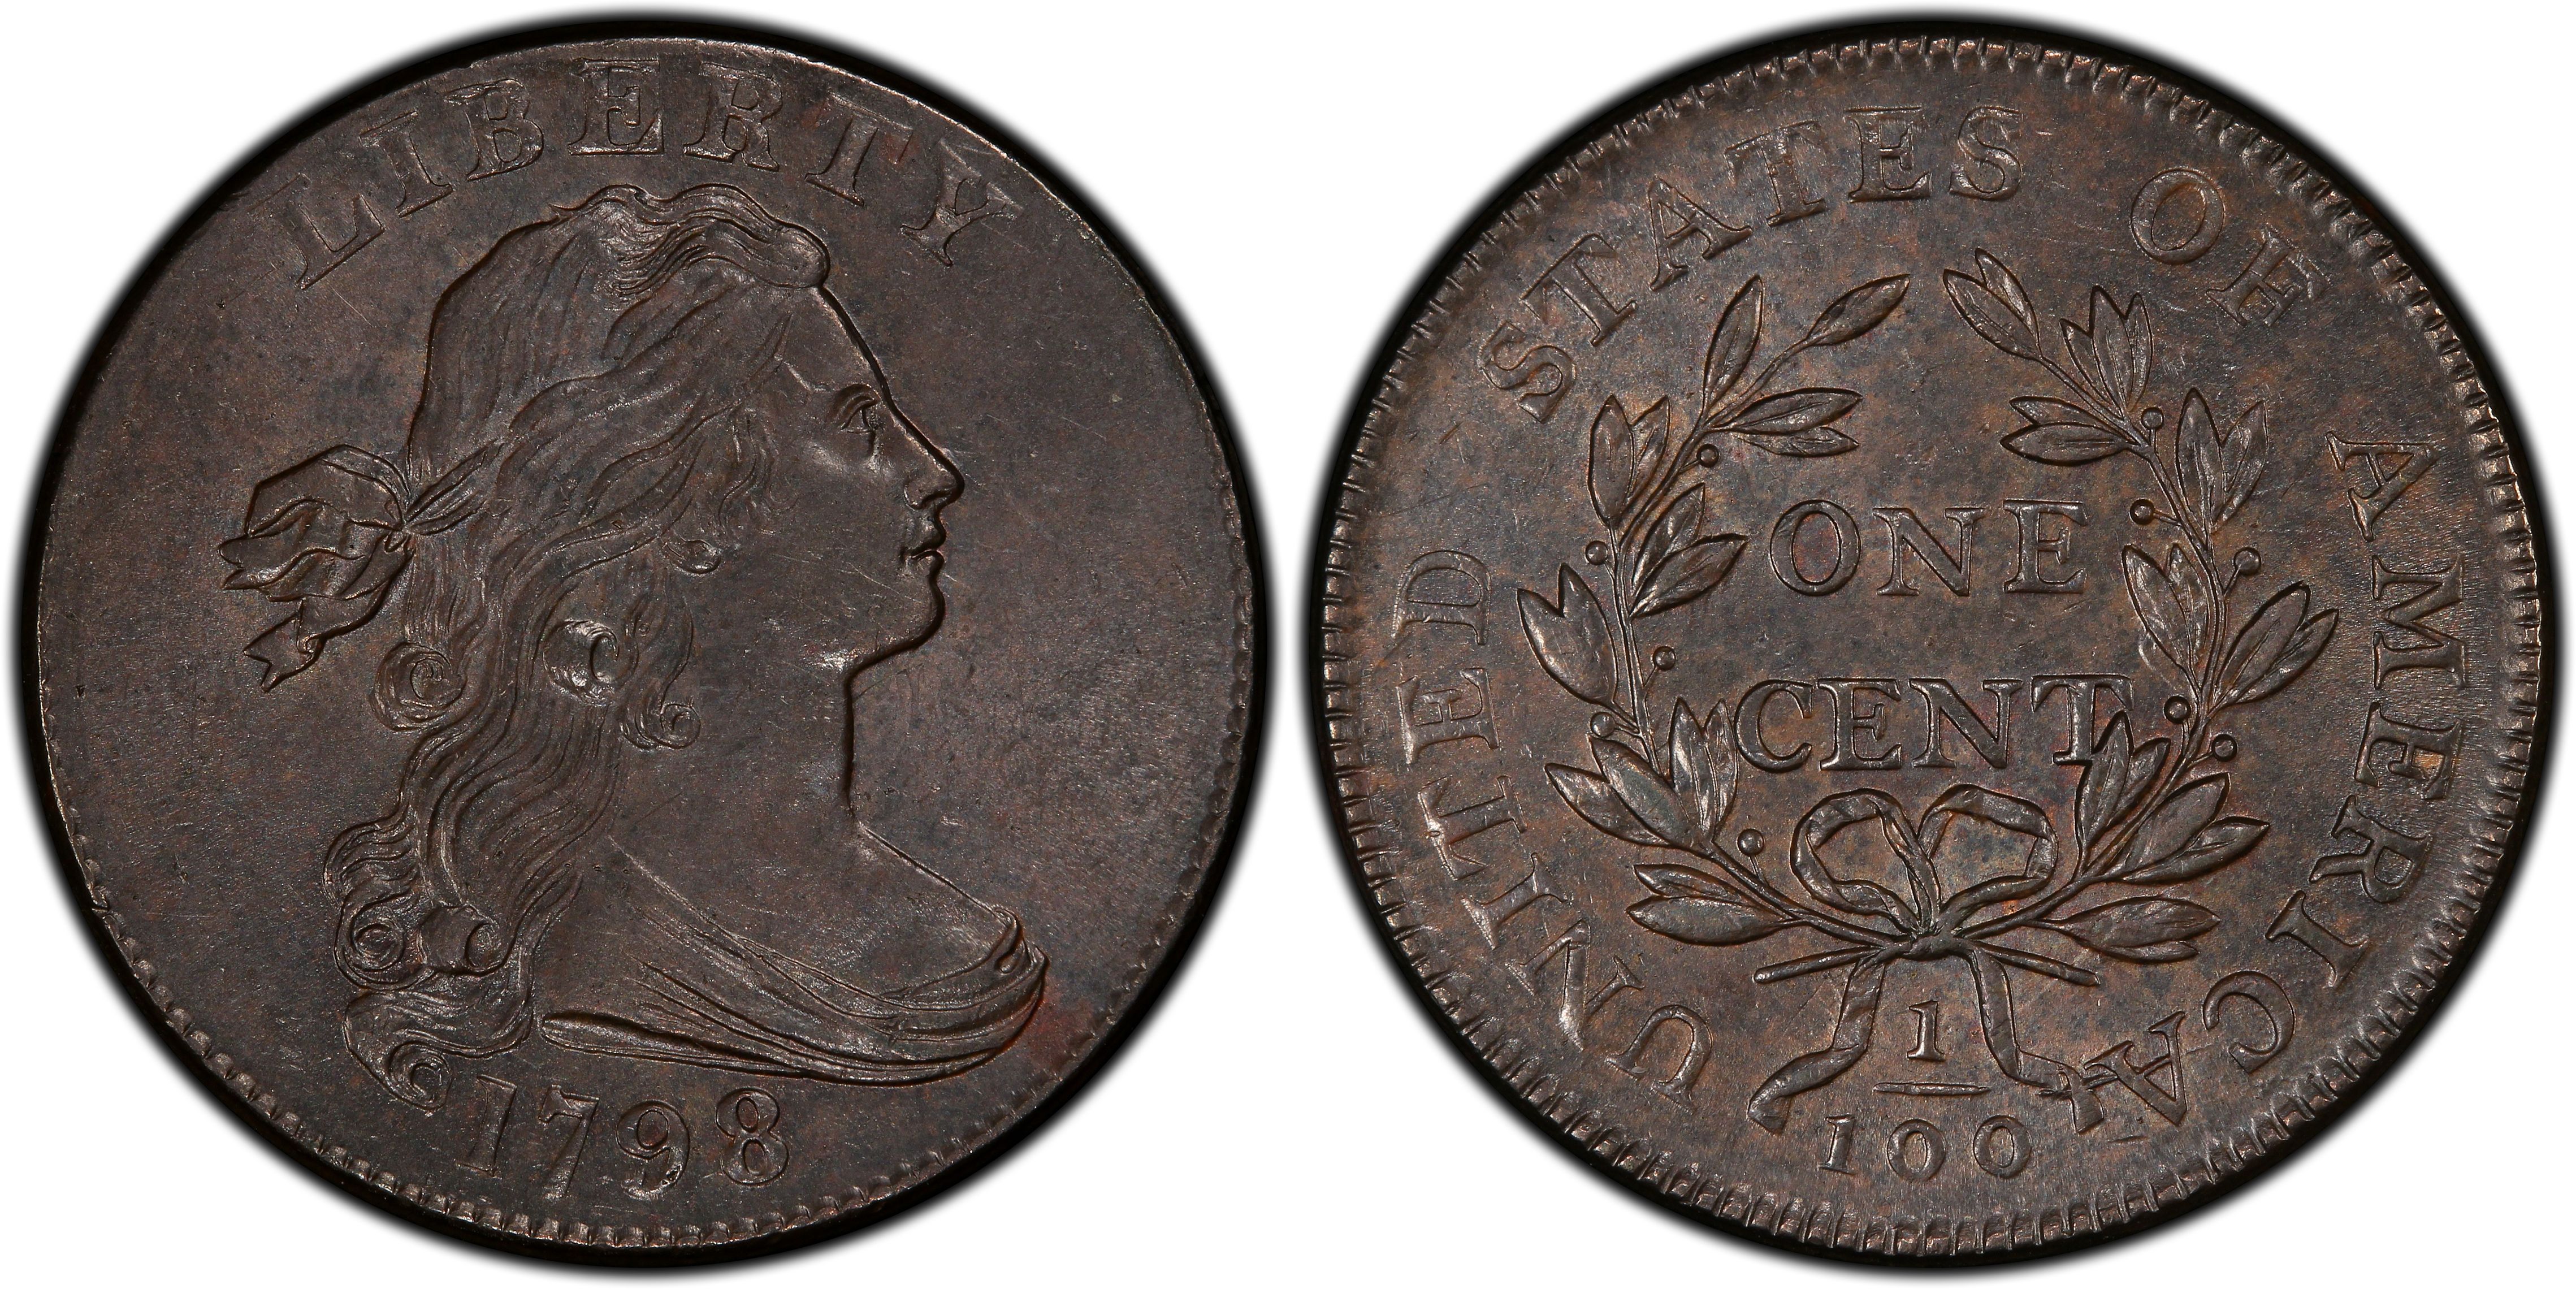 1798 1C S-182, BN (Regular Strike) Draped Bust Cent - PCGS CoinFacts